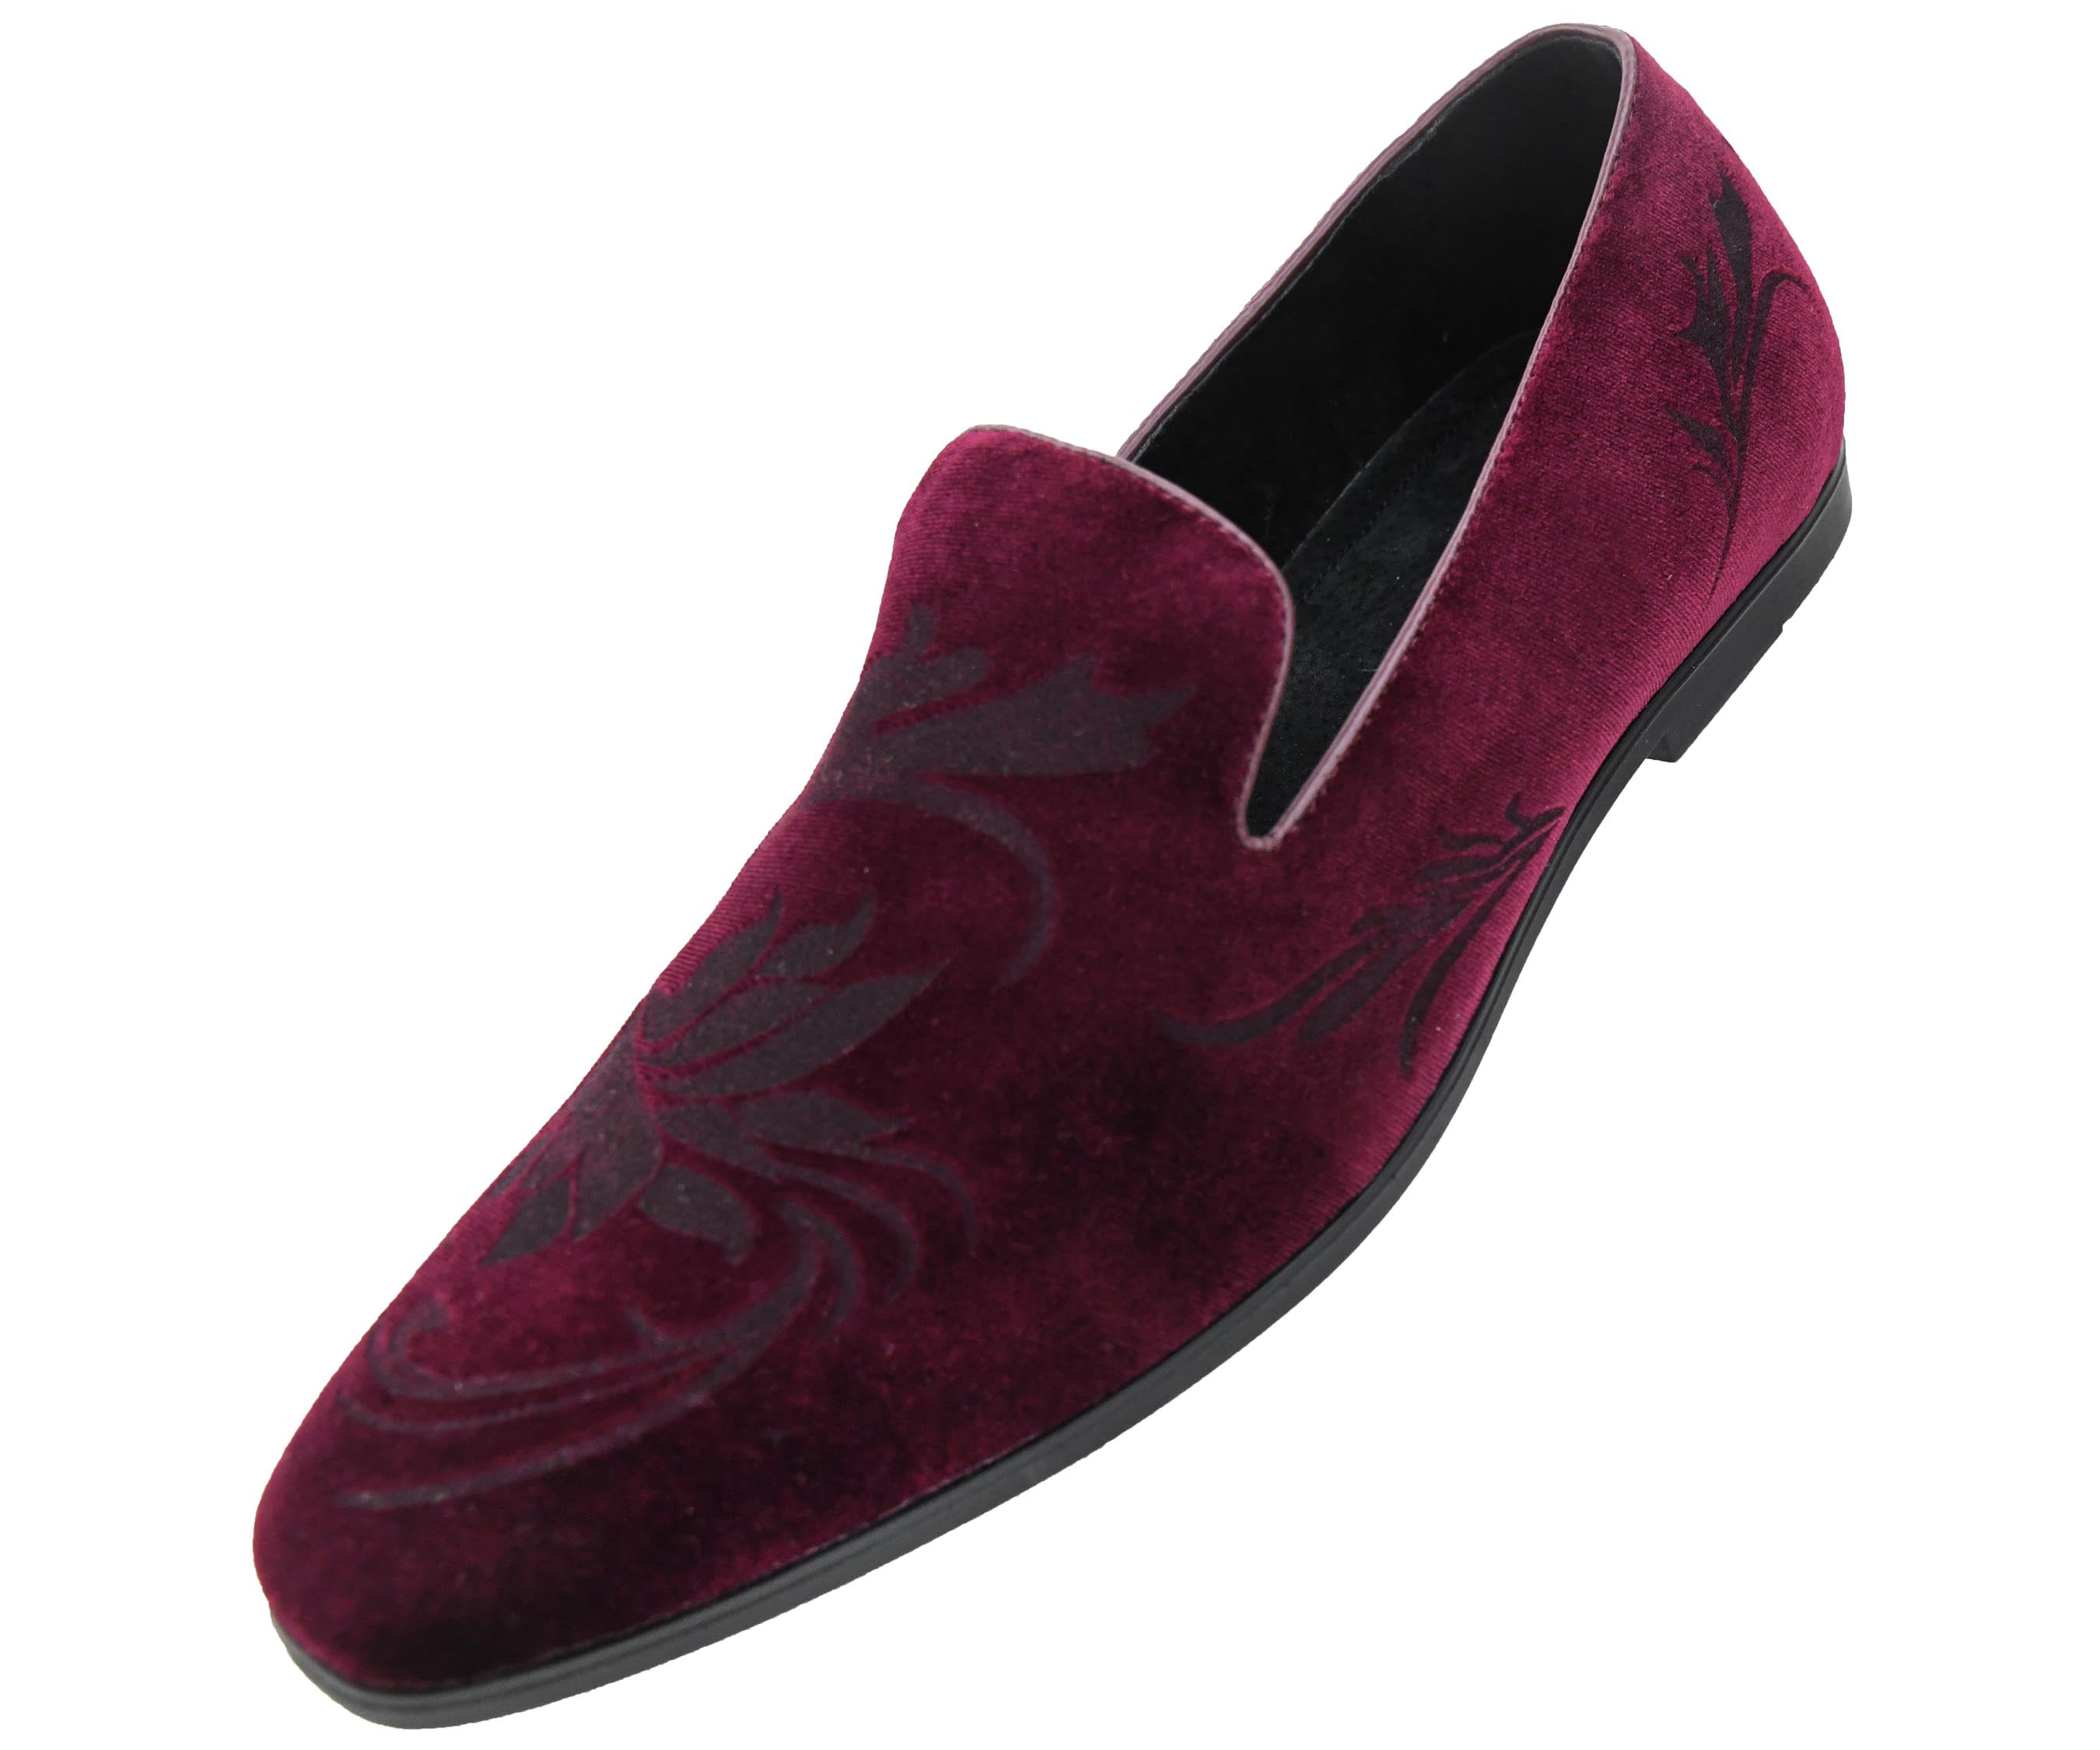 humor Vedhæft til Så mange Amali Men's Dress Shoes Posh Faux Velvet Botanical Embossed and Quilted  Smoking Slippers Available in Black, Taupe-Oyster, Stone, and Burgundy -  Walmart.com